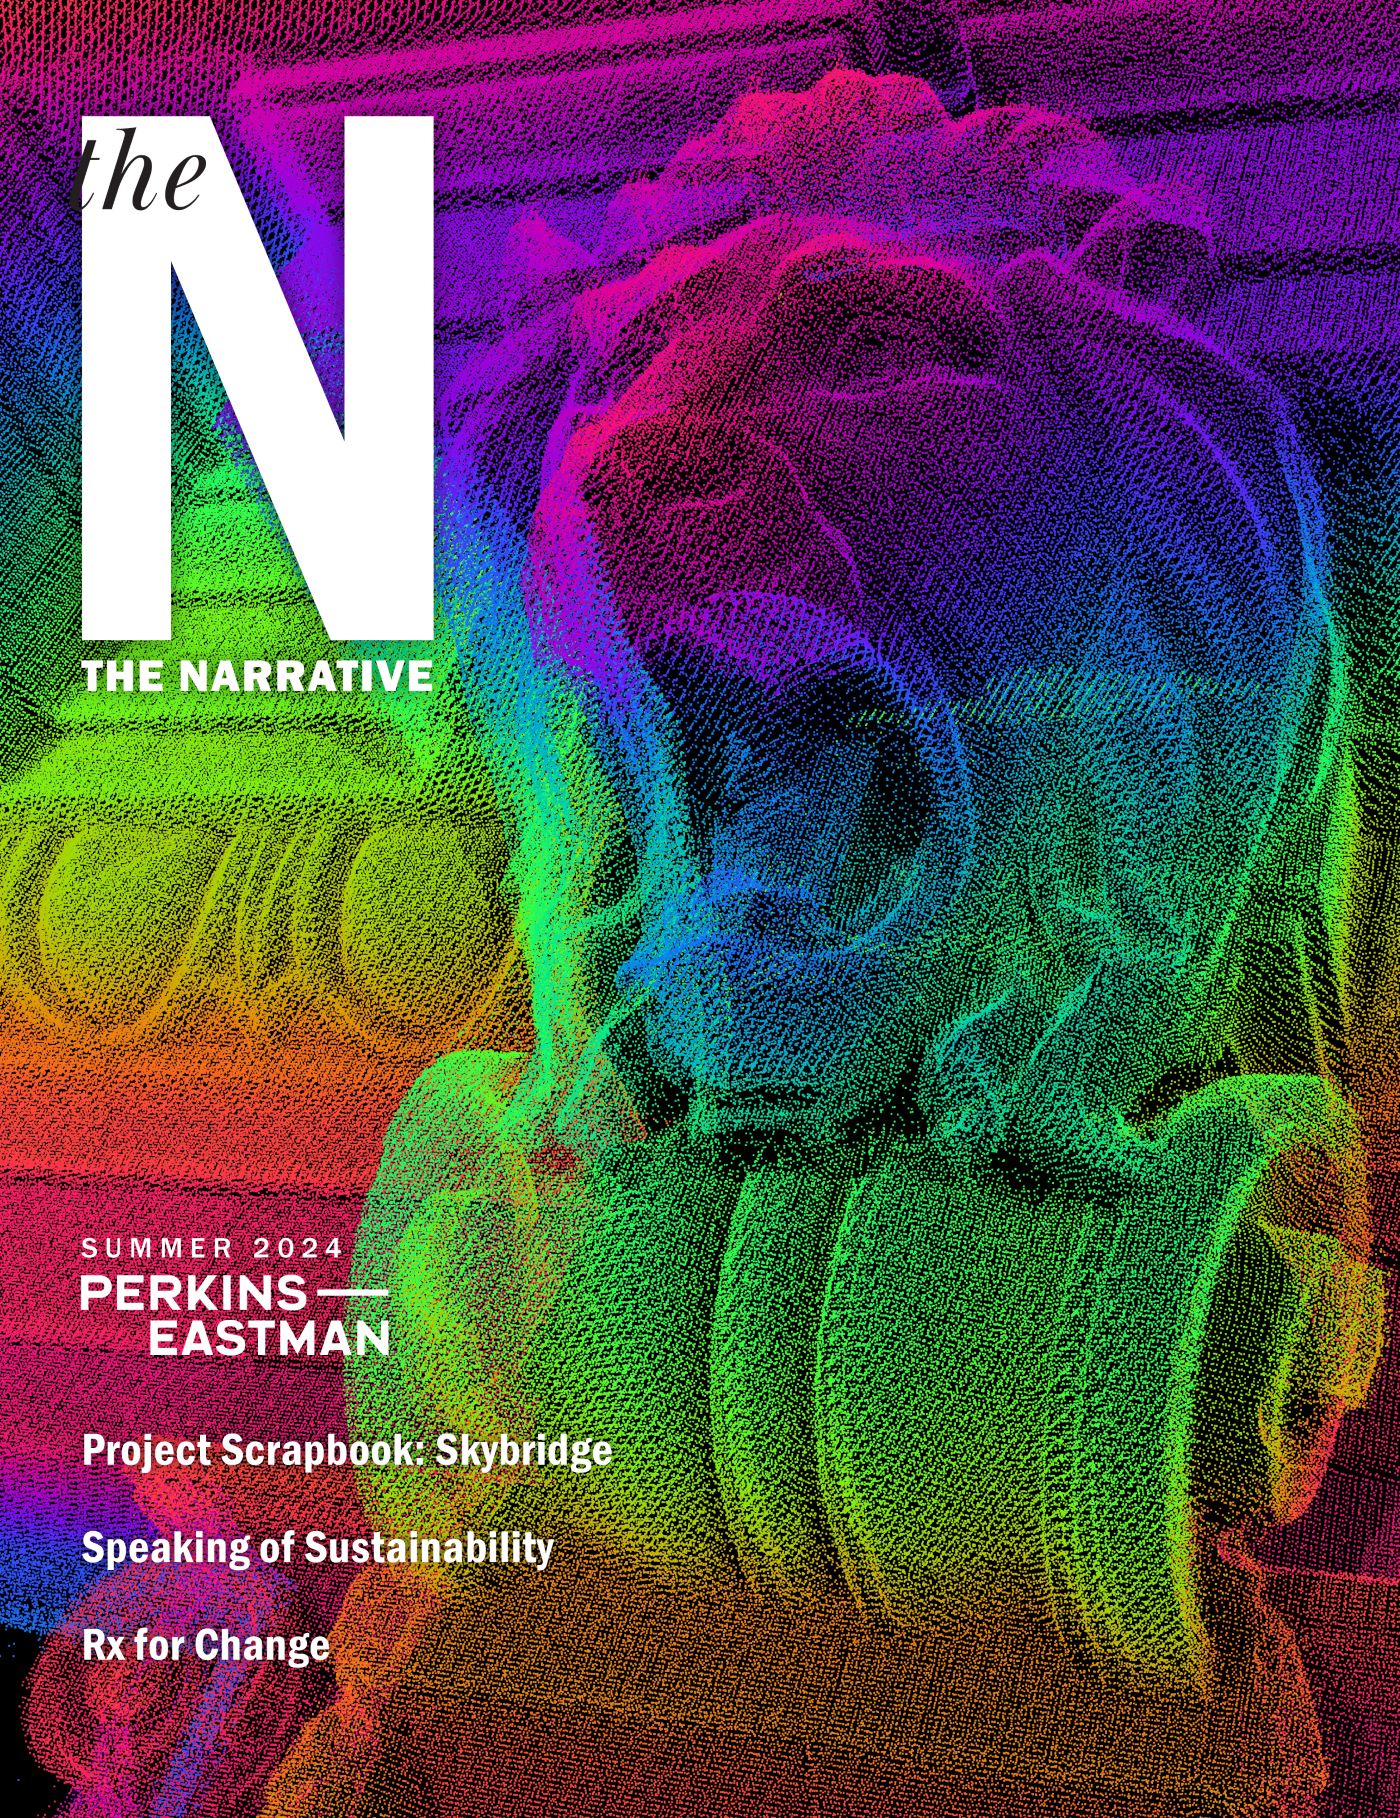 The cover of the Summer 2024 issue of The Narrative